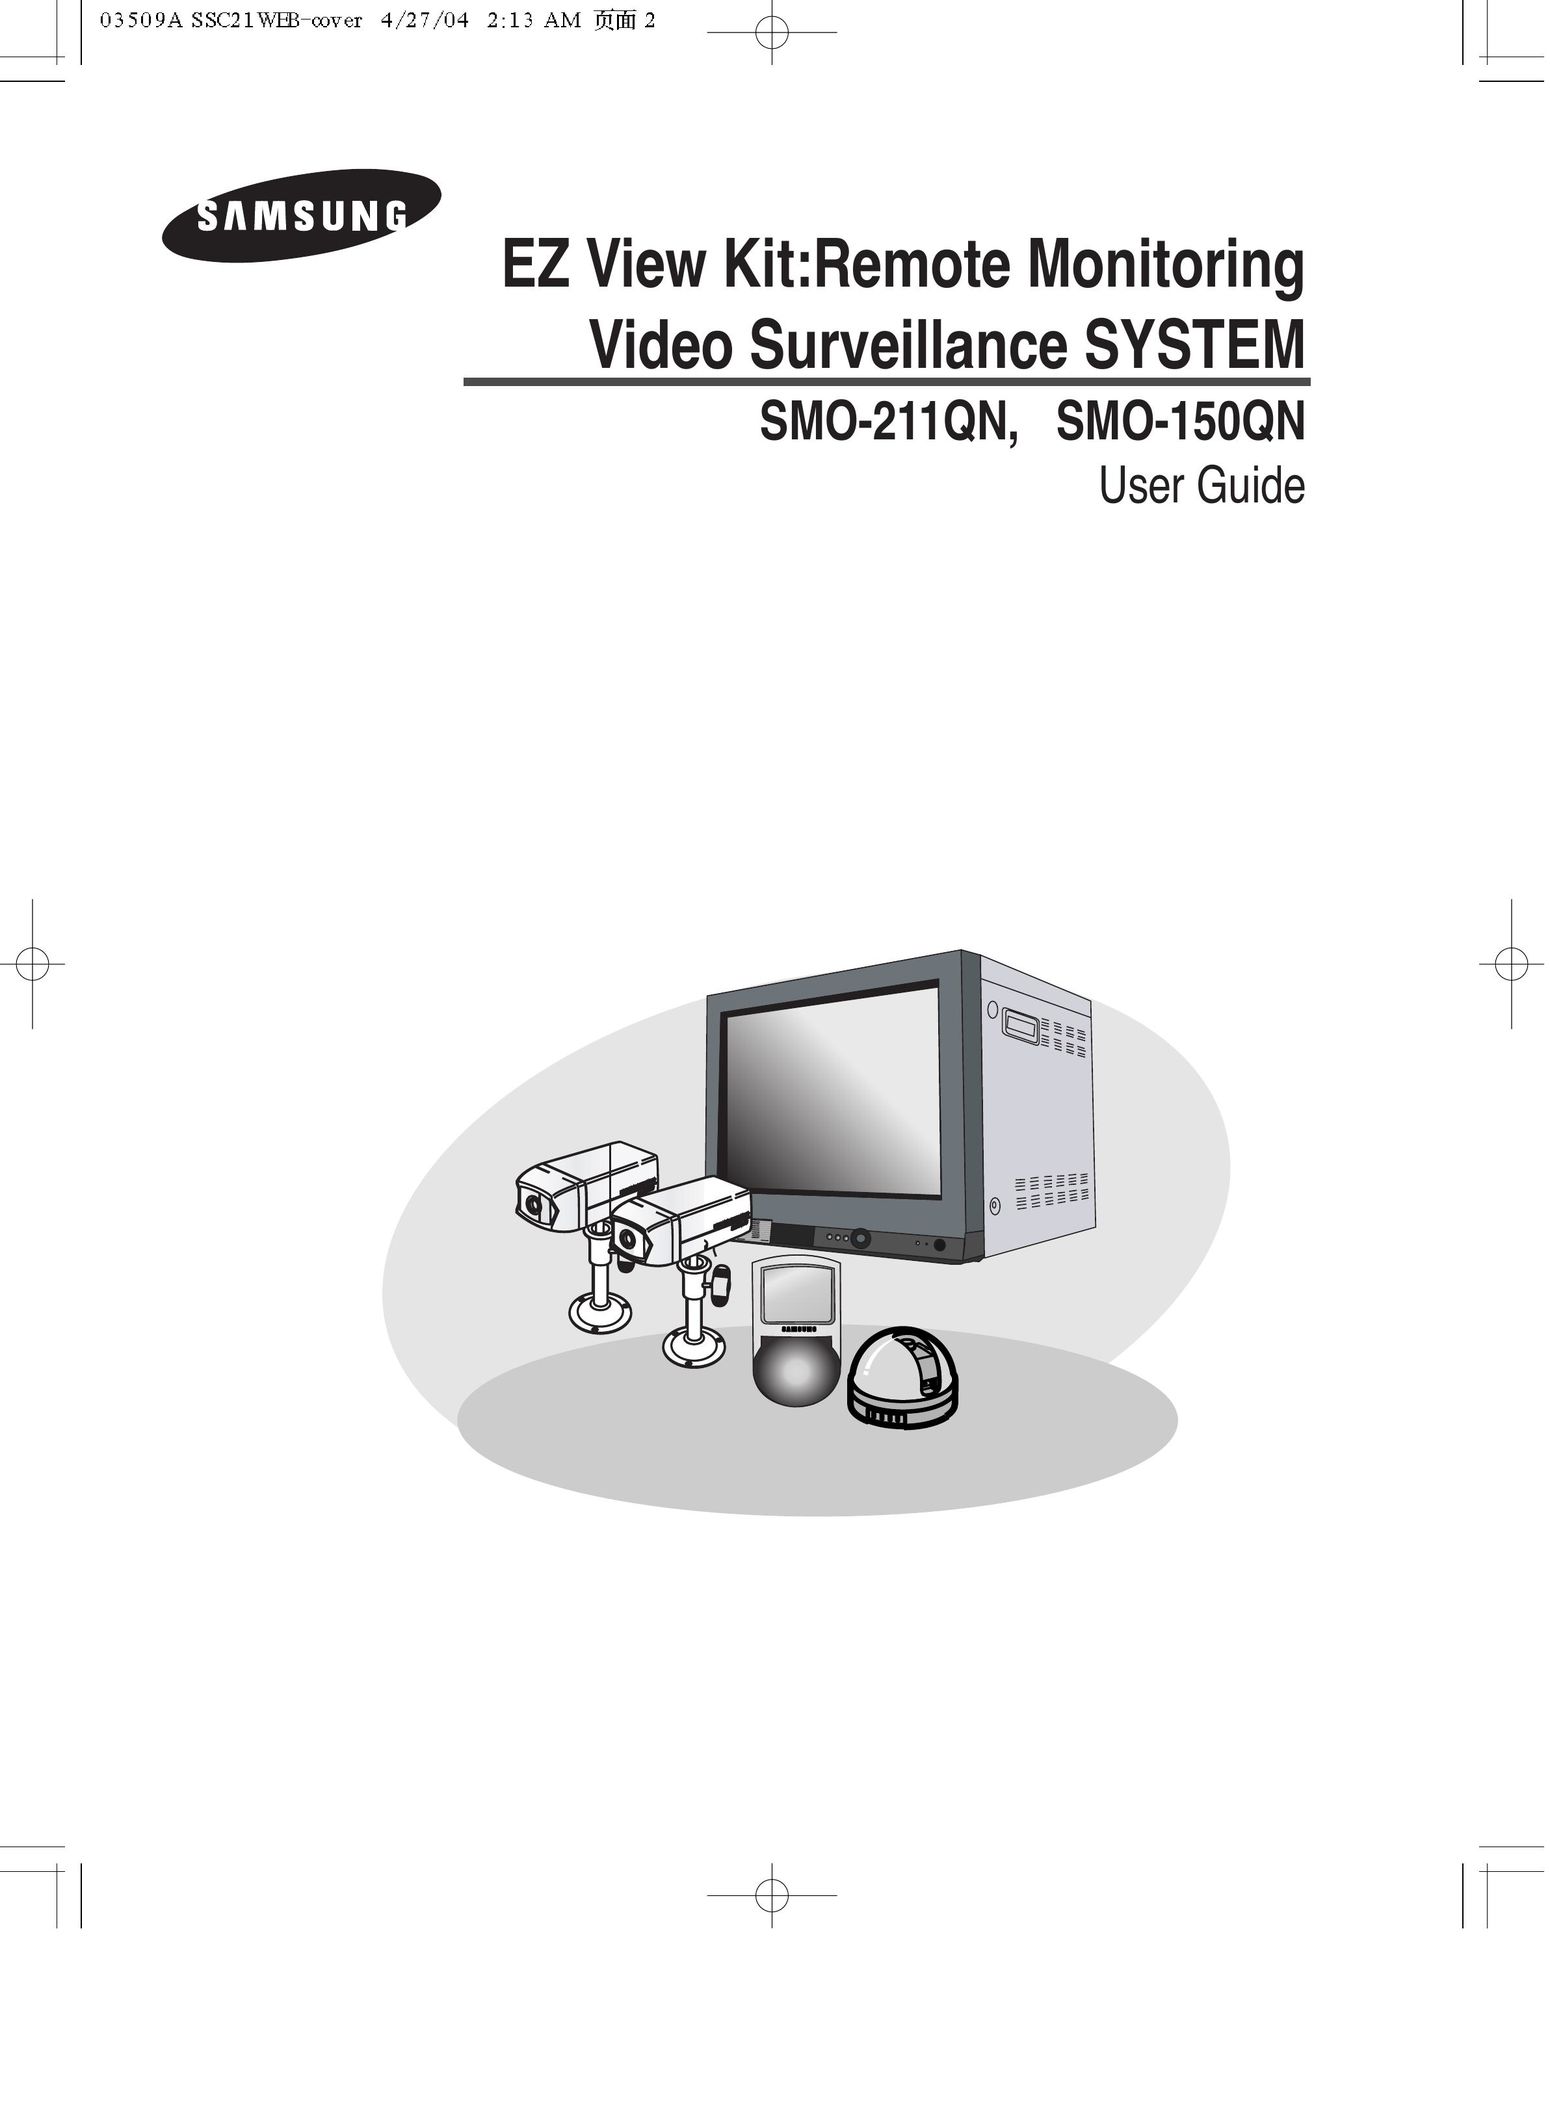 Samsung SMO-150QN Home Security System User Manual